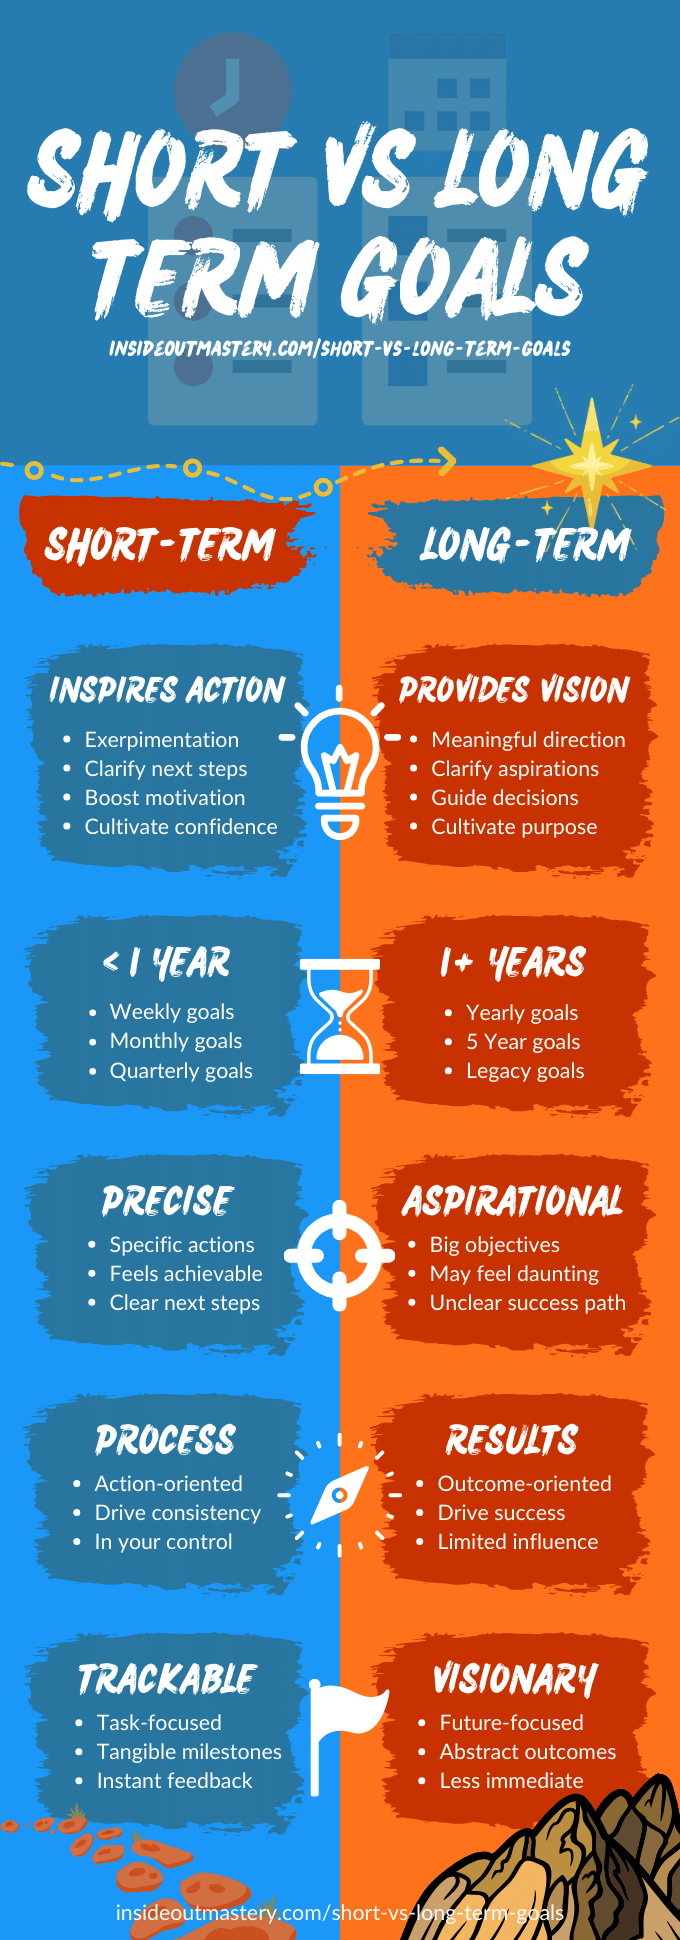 Difference short-term vs long-term goals infographic